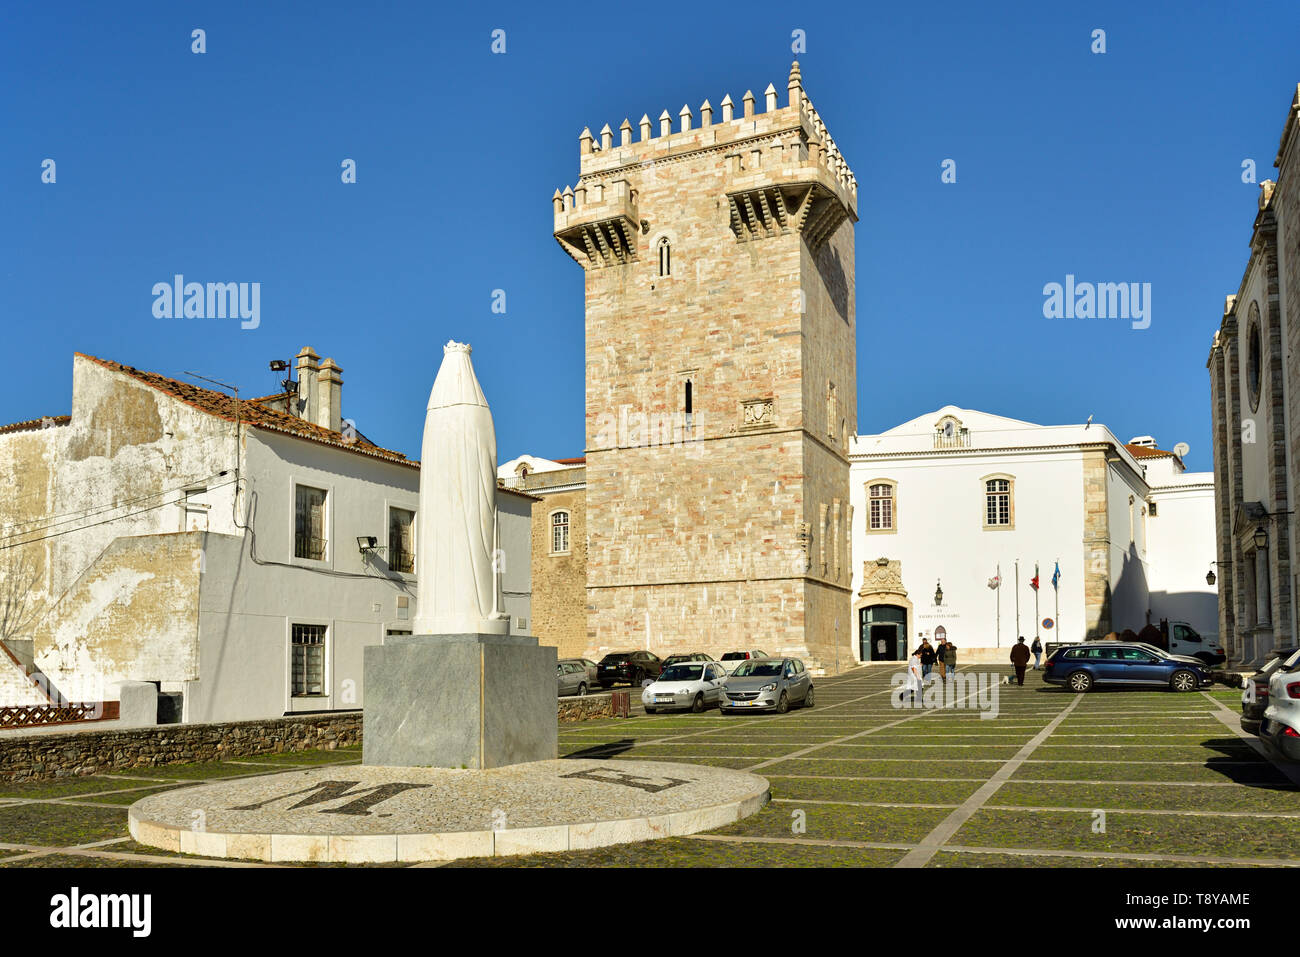 The main tower dating back to 1260 and the Pousada (hotel) of the medieval walled city of Estremoz. Alentejo, Portugal Stock Photo